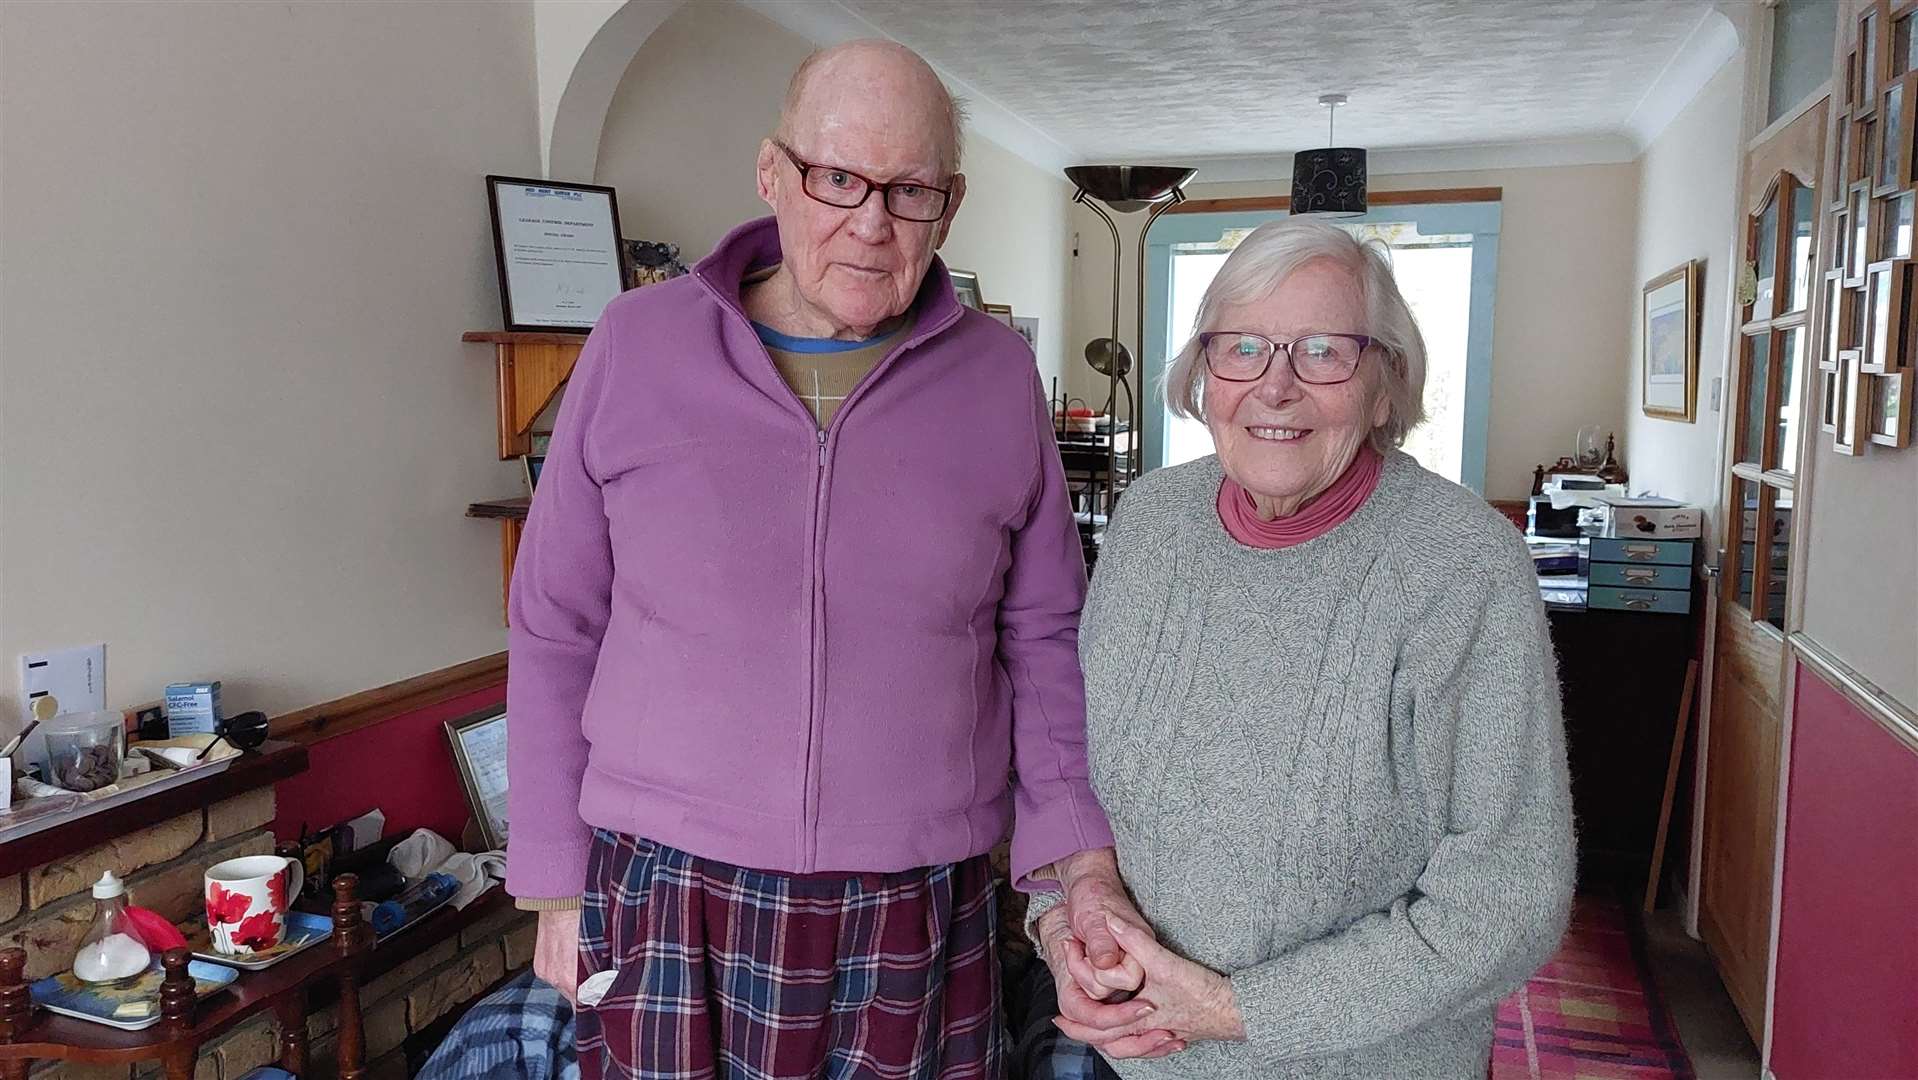 Pat and Betty Burke were left upset after claiming a DNR was signed on Mr Burke's behalf